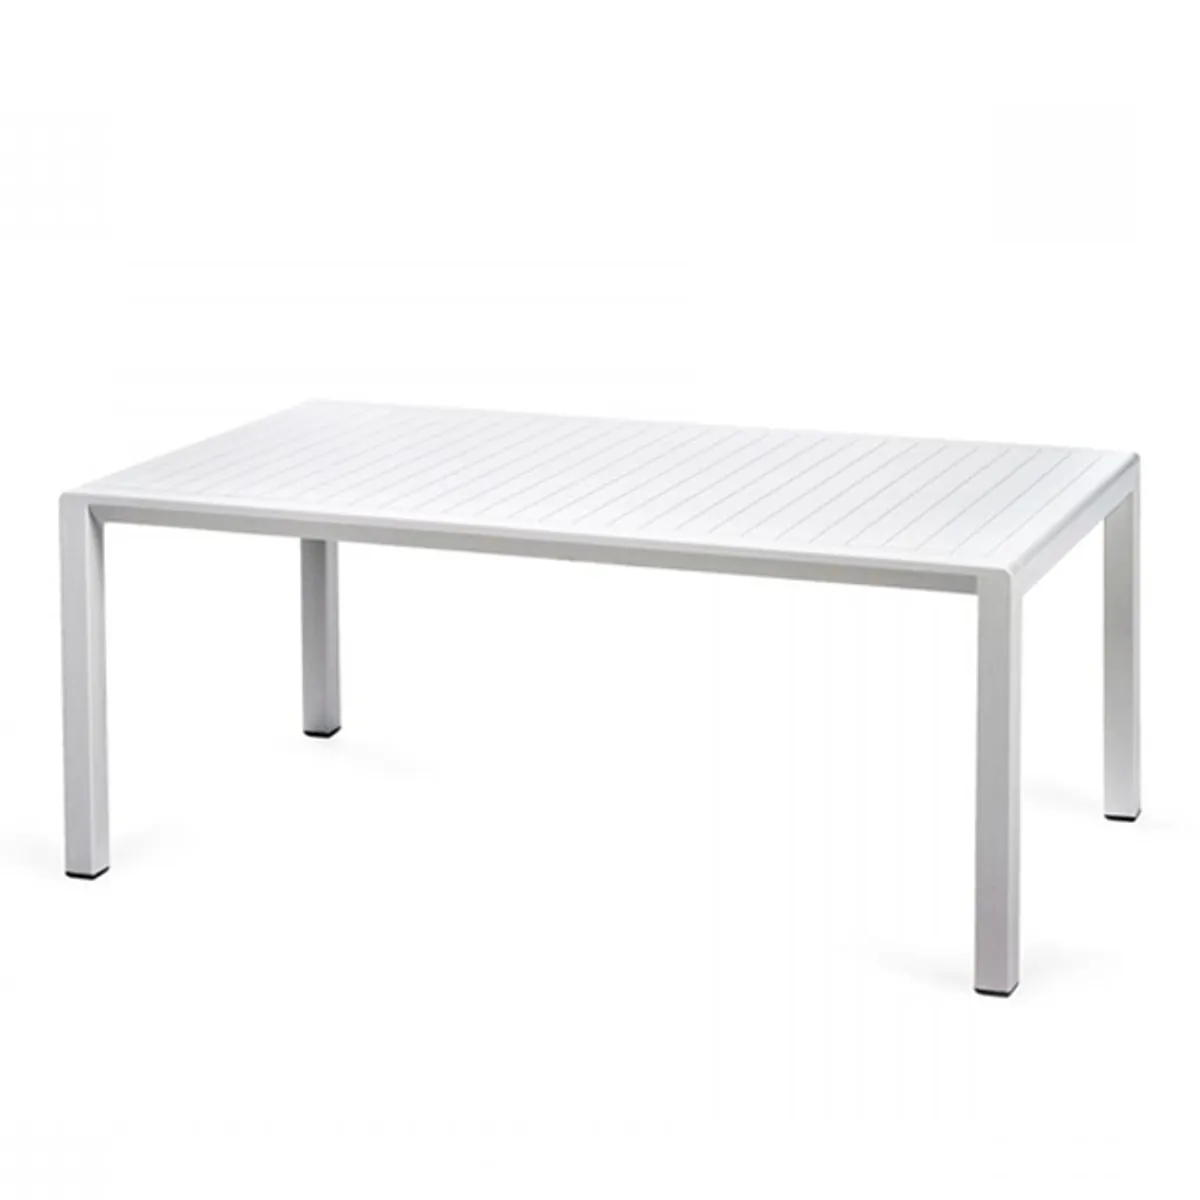 Aria tavolino coffee table Inside Out Contracts2